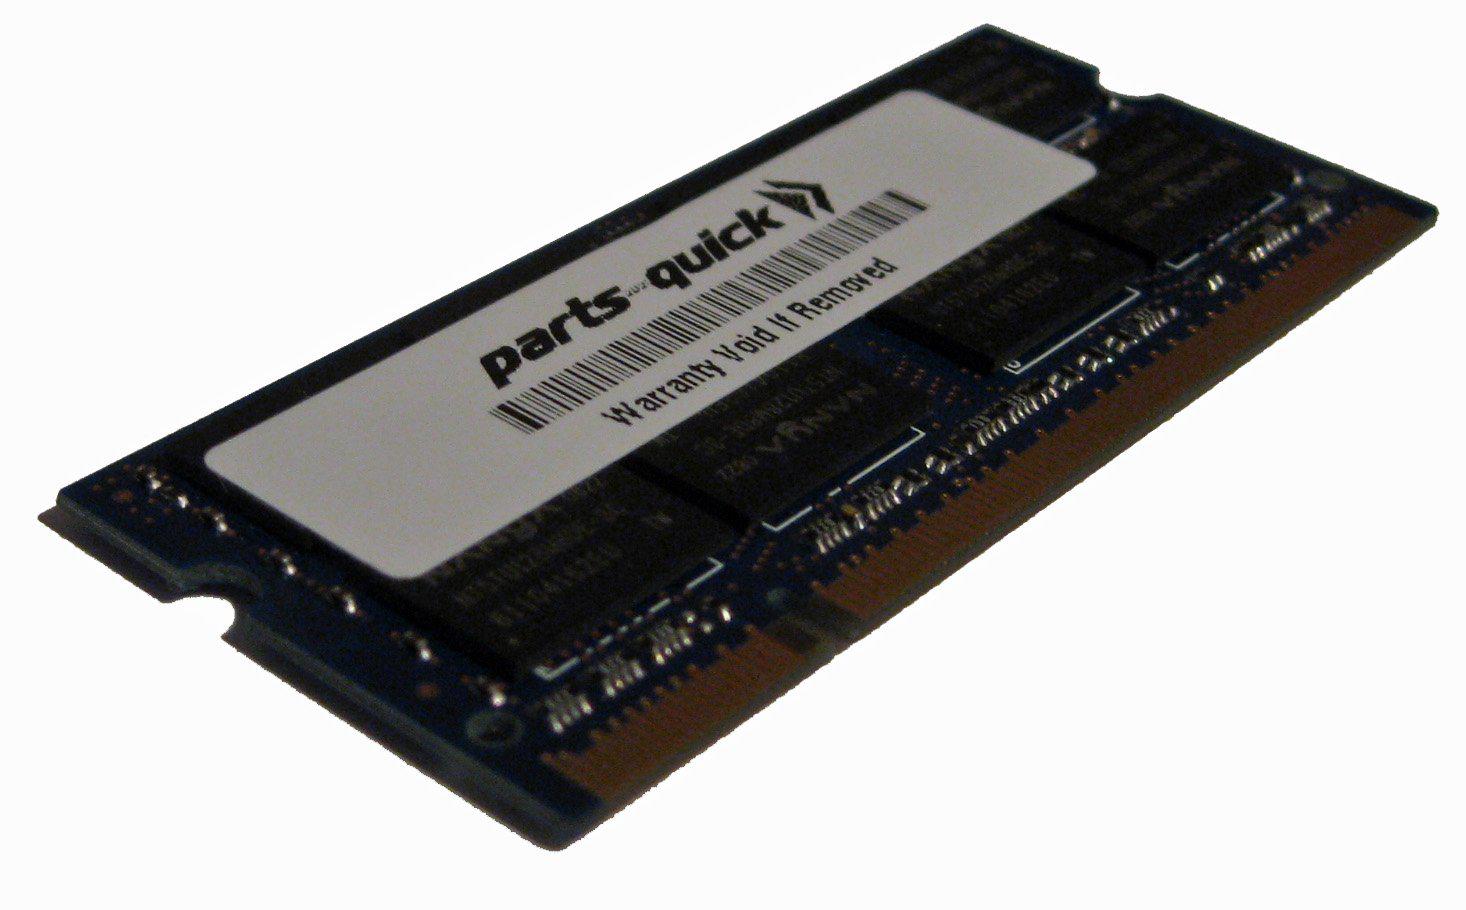 parts-quick 256mb pc100 144 pin sdram sodimm 100mhz low density memory ram for nec versa laptop notebook (parts-quick brand). equivalent 